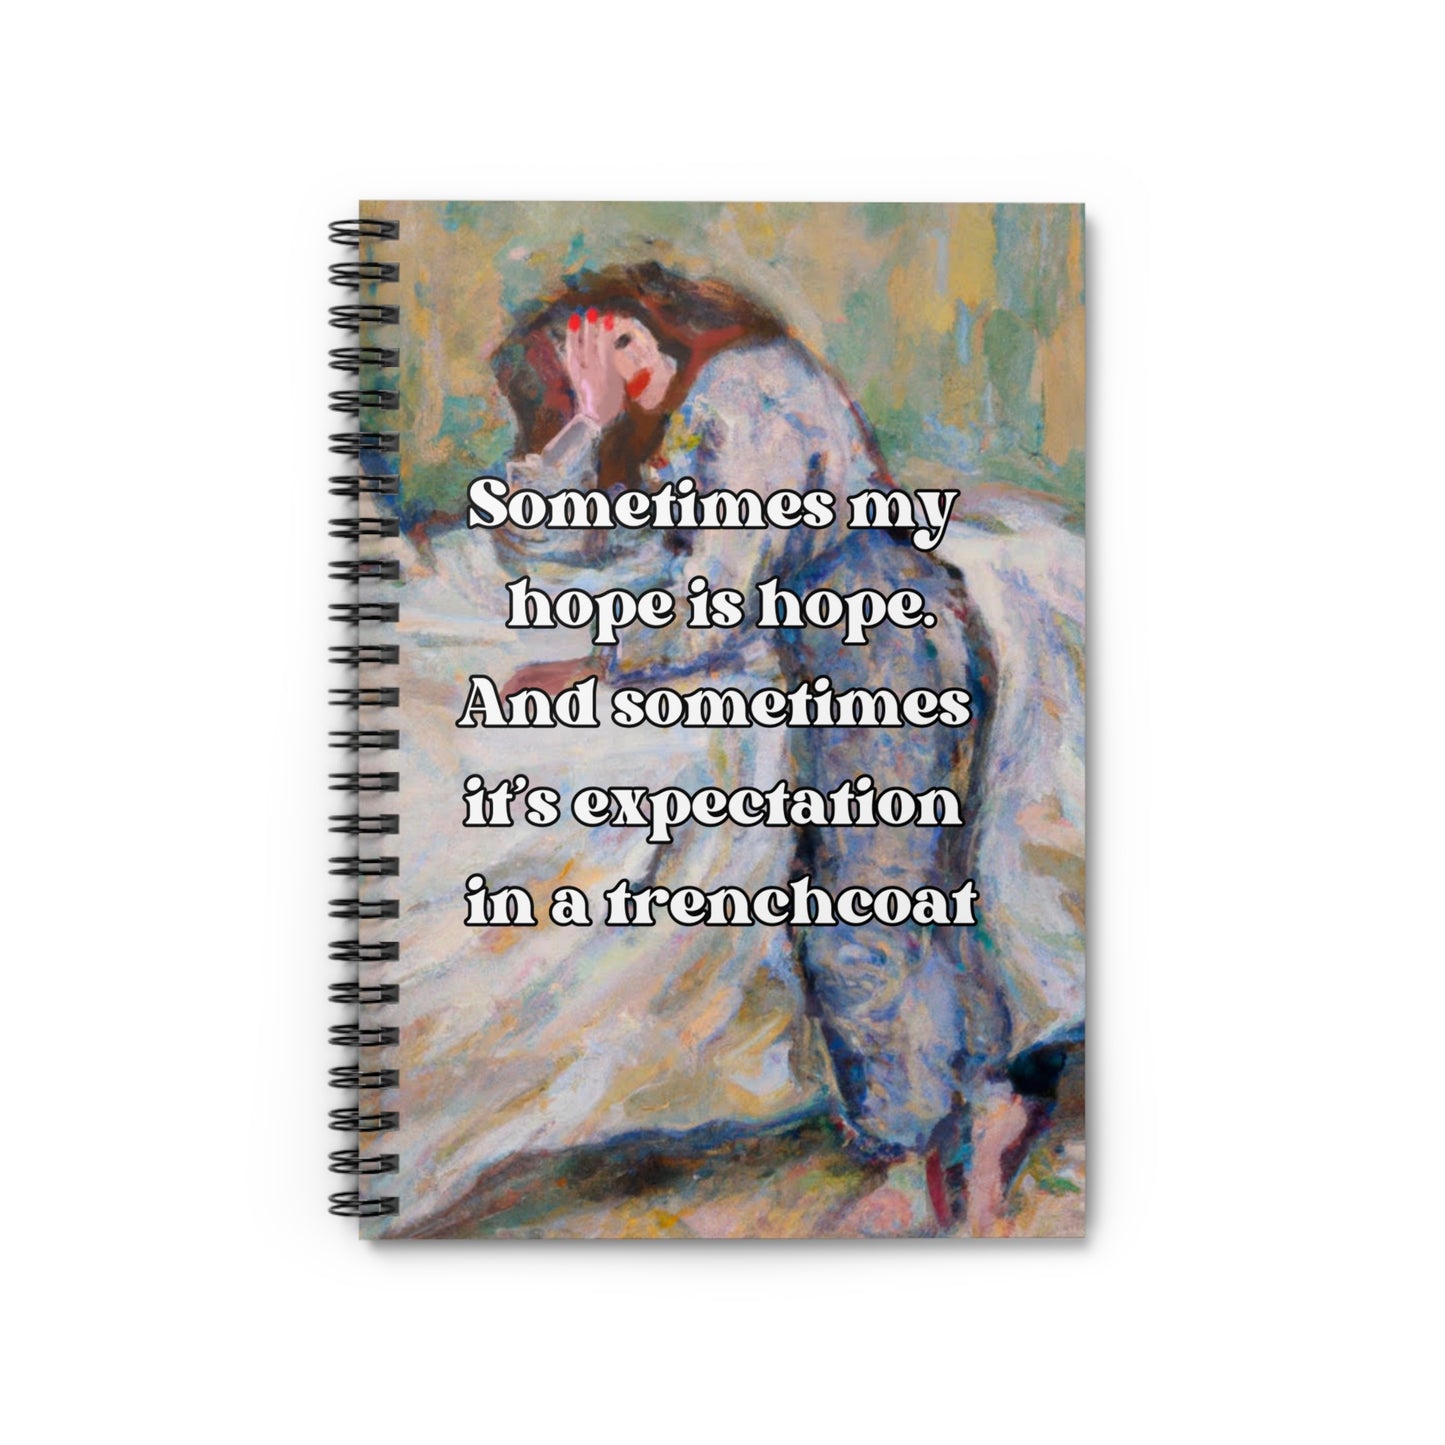 Sometimes My Hope is Hope. And Sometimes it's... - Ruled Line Notebook